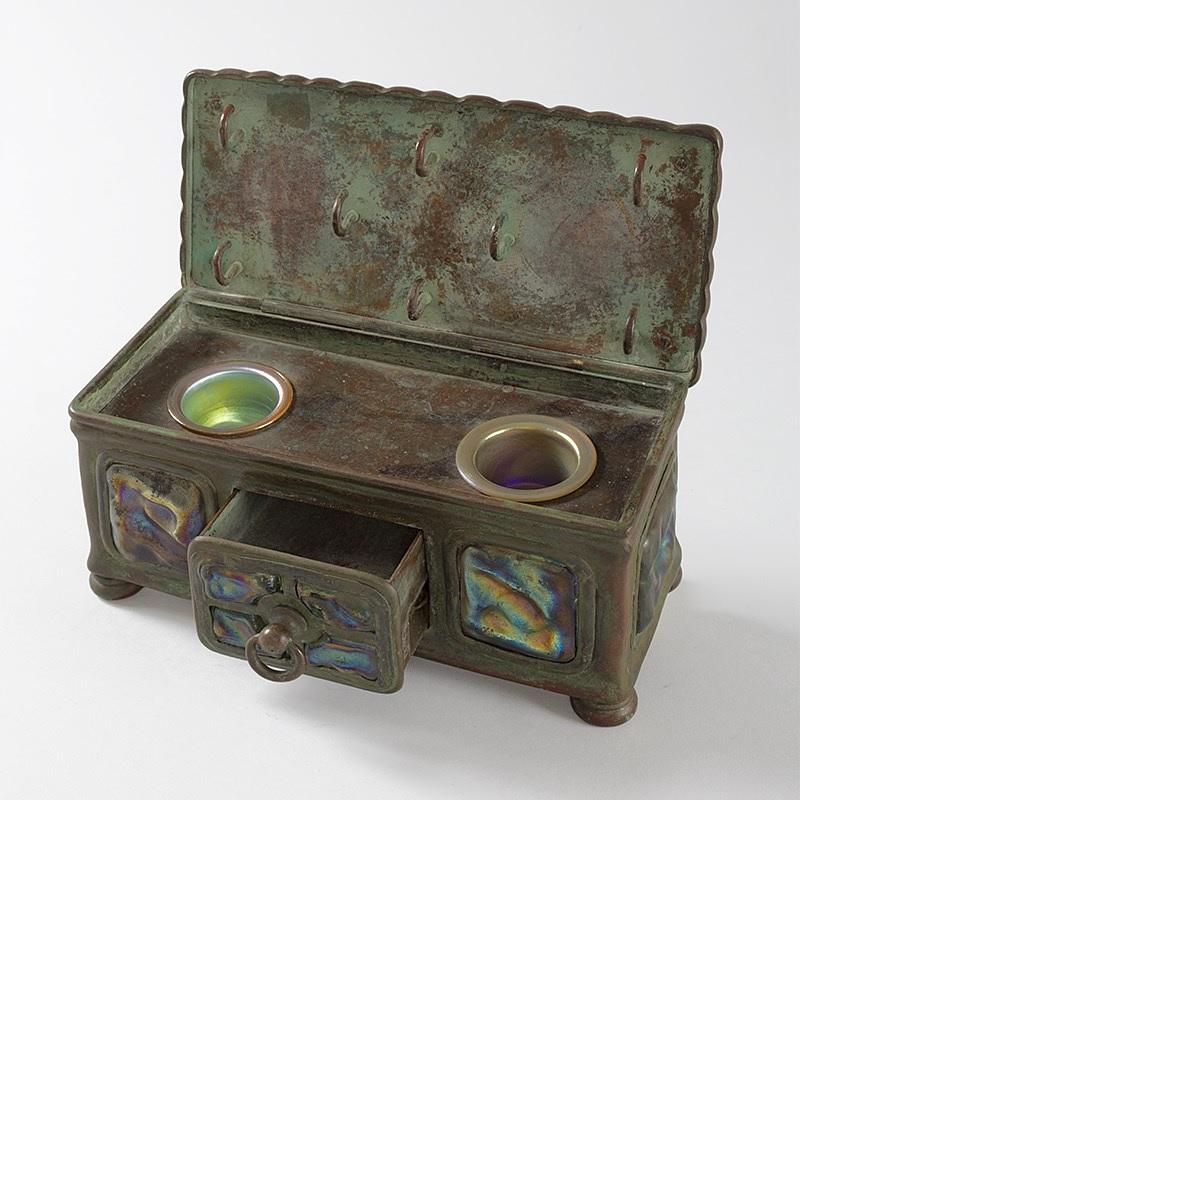 A Tiffany Studios New York Art Nouveau patinated bronze and turtleback tile inkstand by Tiffany Studios New York. The top and sides of the inkstand are decorated with panels of multi-colored turtleback tiles. The interior holds two inkpots; the